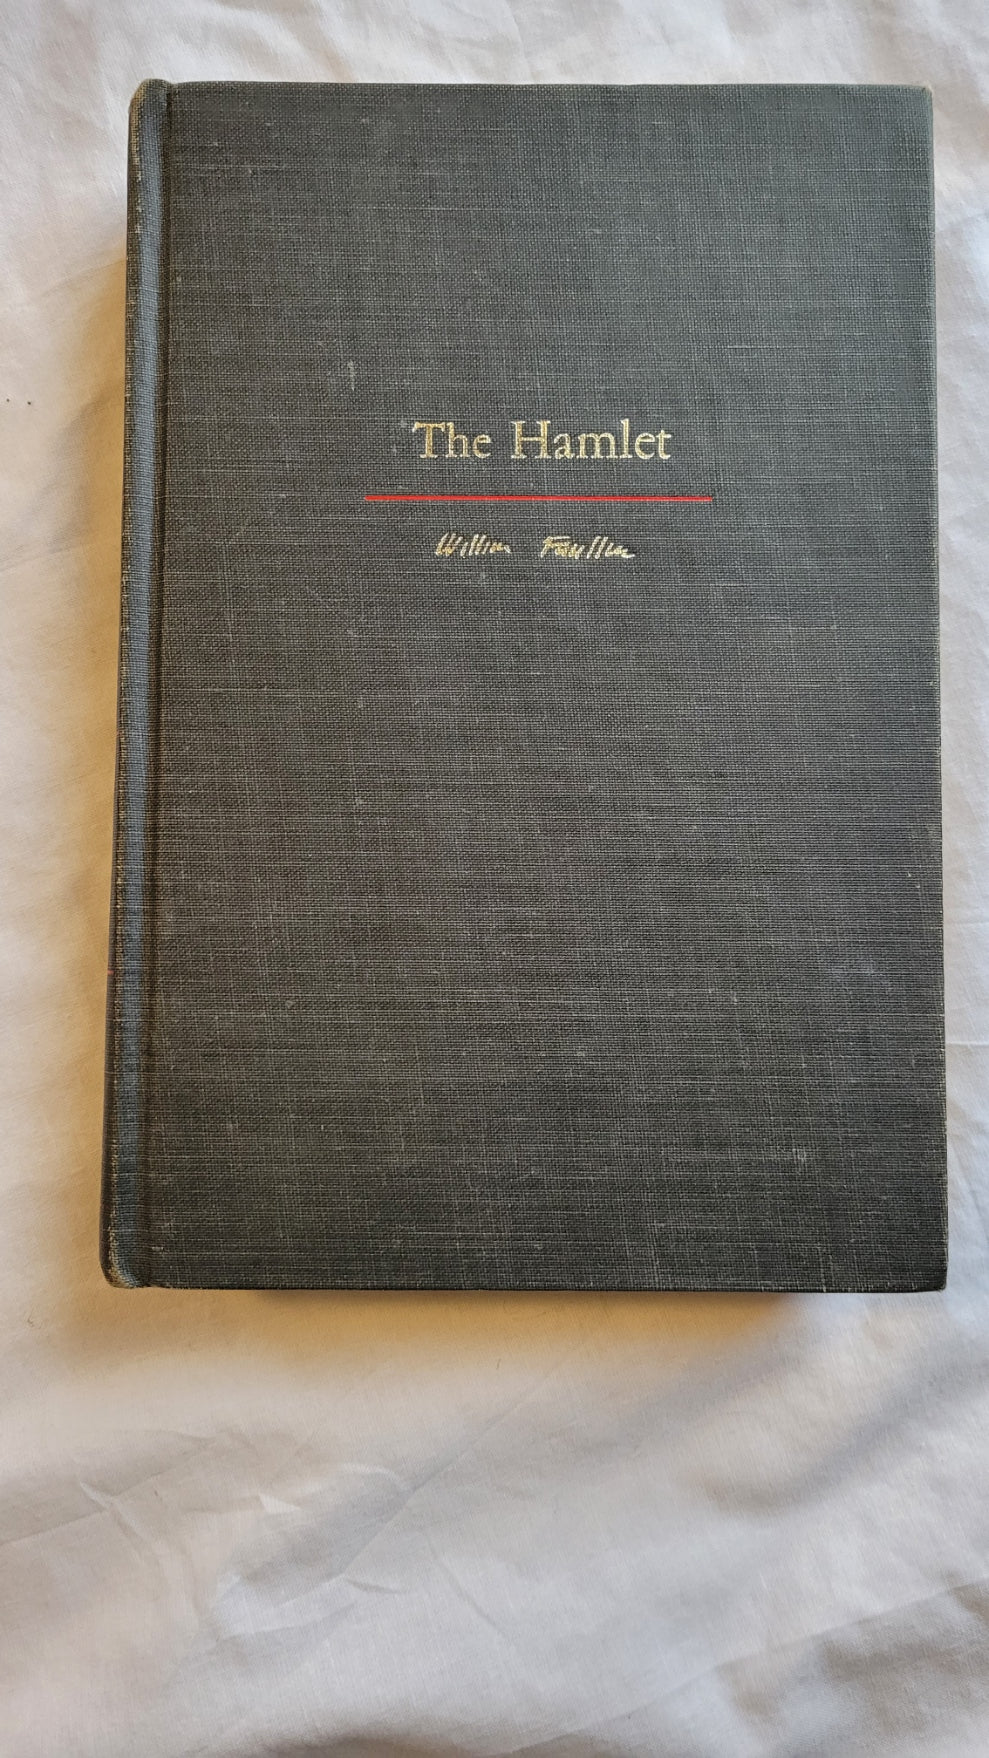 Vintage books for sale The Snopes Trilogy: "The Hamlet", "The Town", and "The Mansion" by William Faulkner, published by Random House, 3rd and 4th printings. The Hamlet front cover.